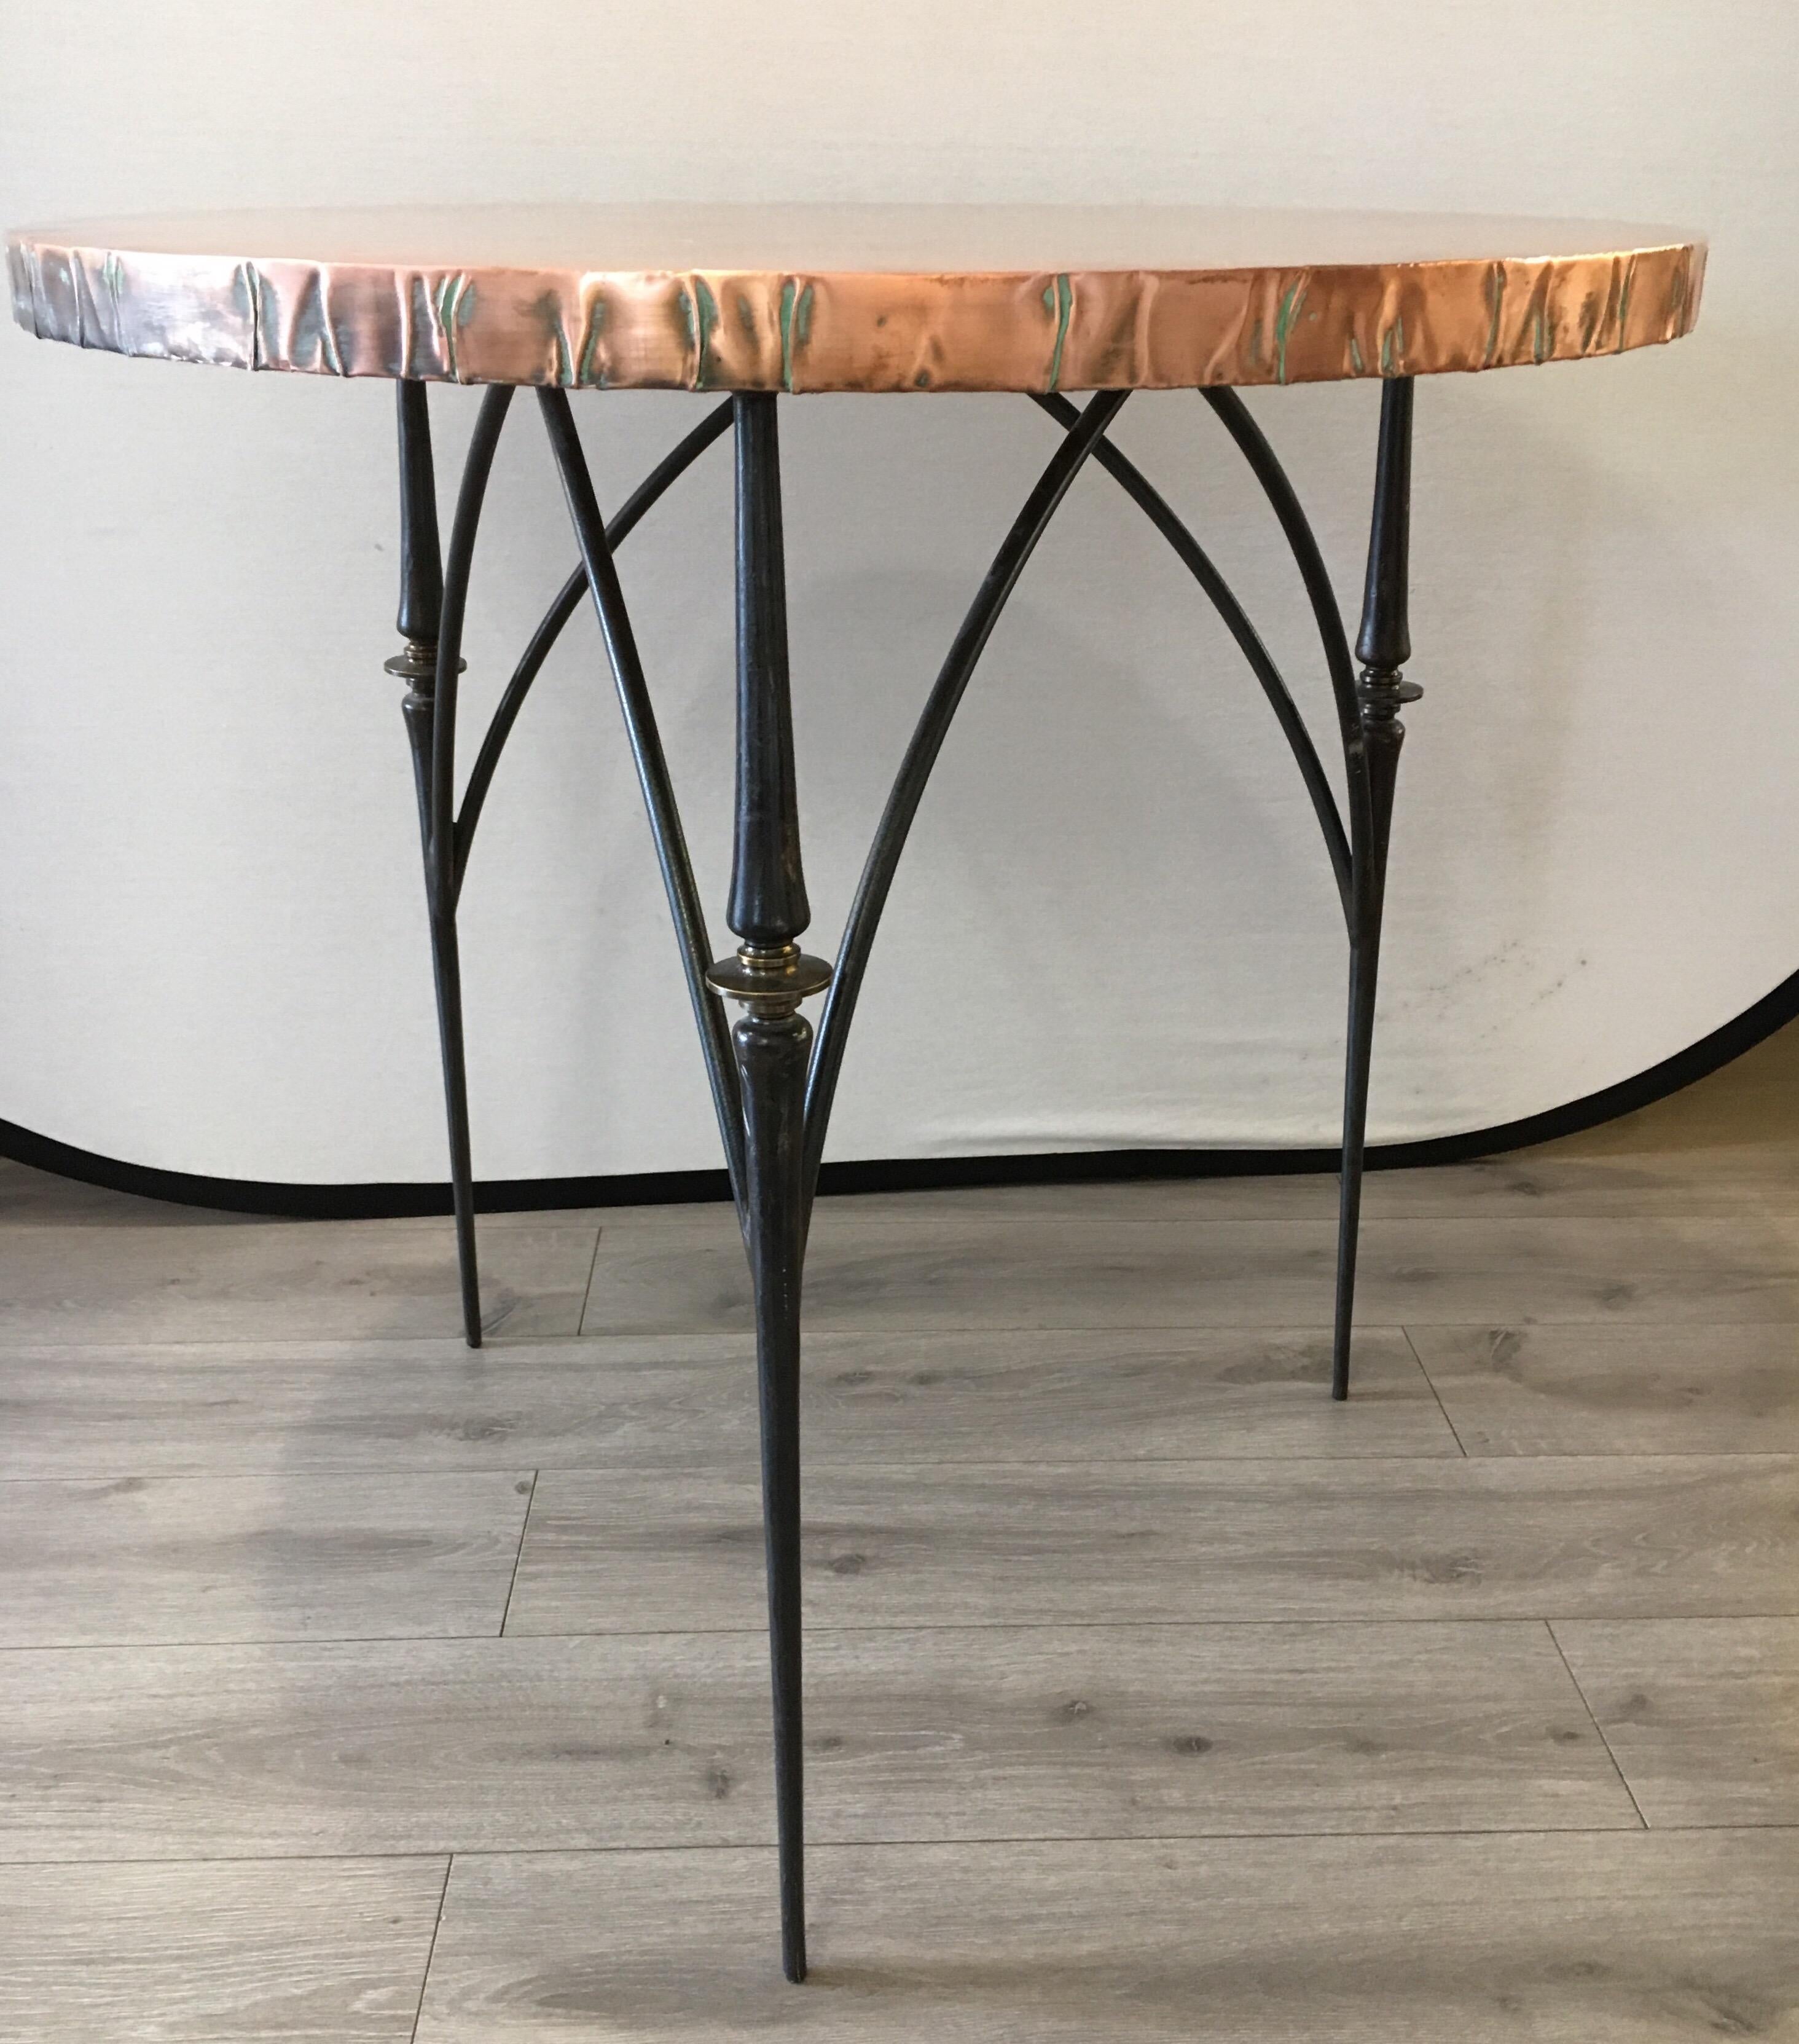 Bespoke pair of matching foyer or center tables that can also be used as a small dining tables. In the style of some of the best studio furniture of designers like Paul Evans, this piece has the elemental presence of a modern sculpture. From afar